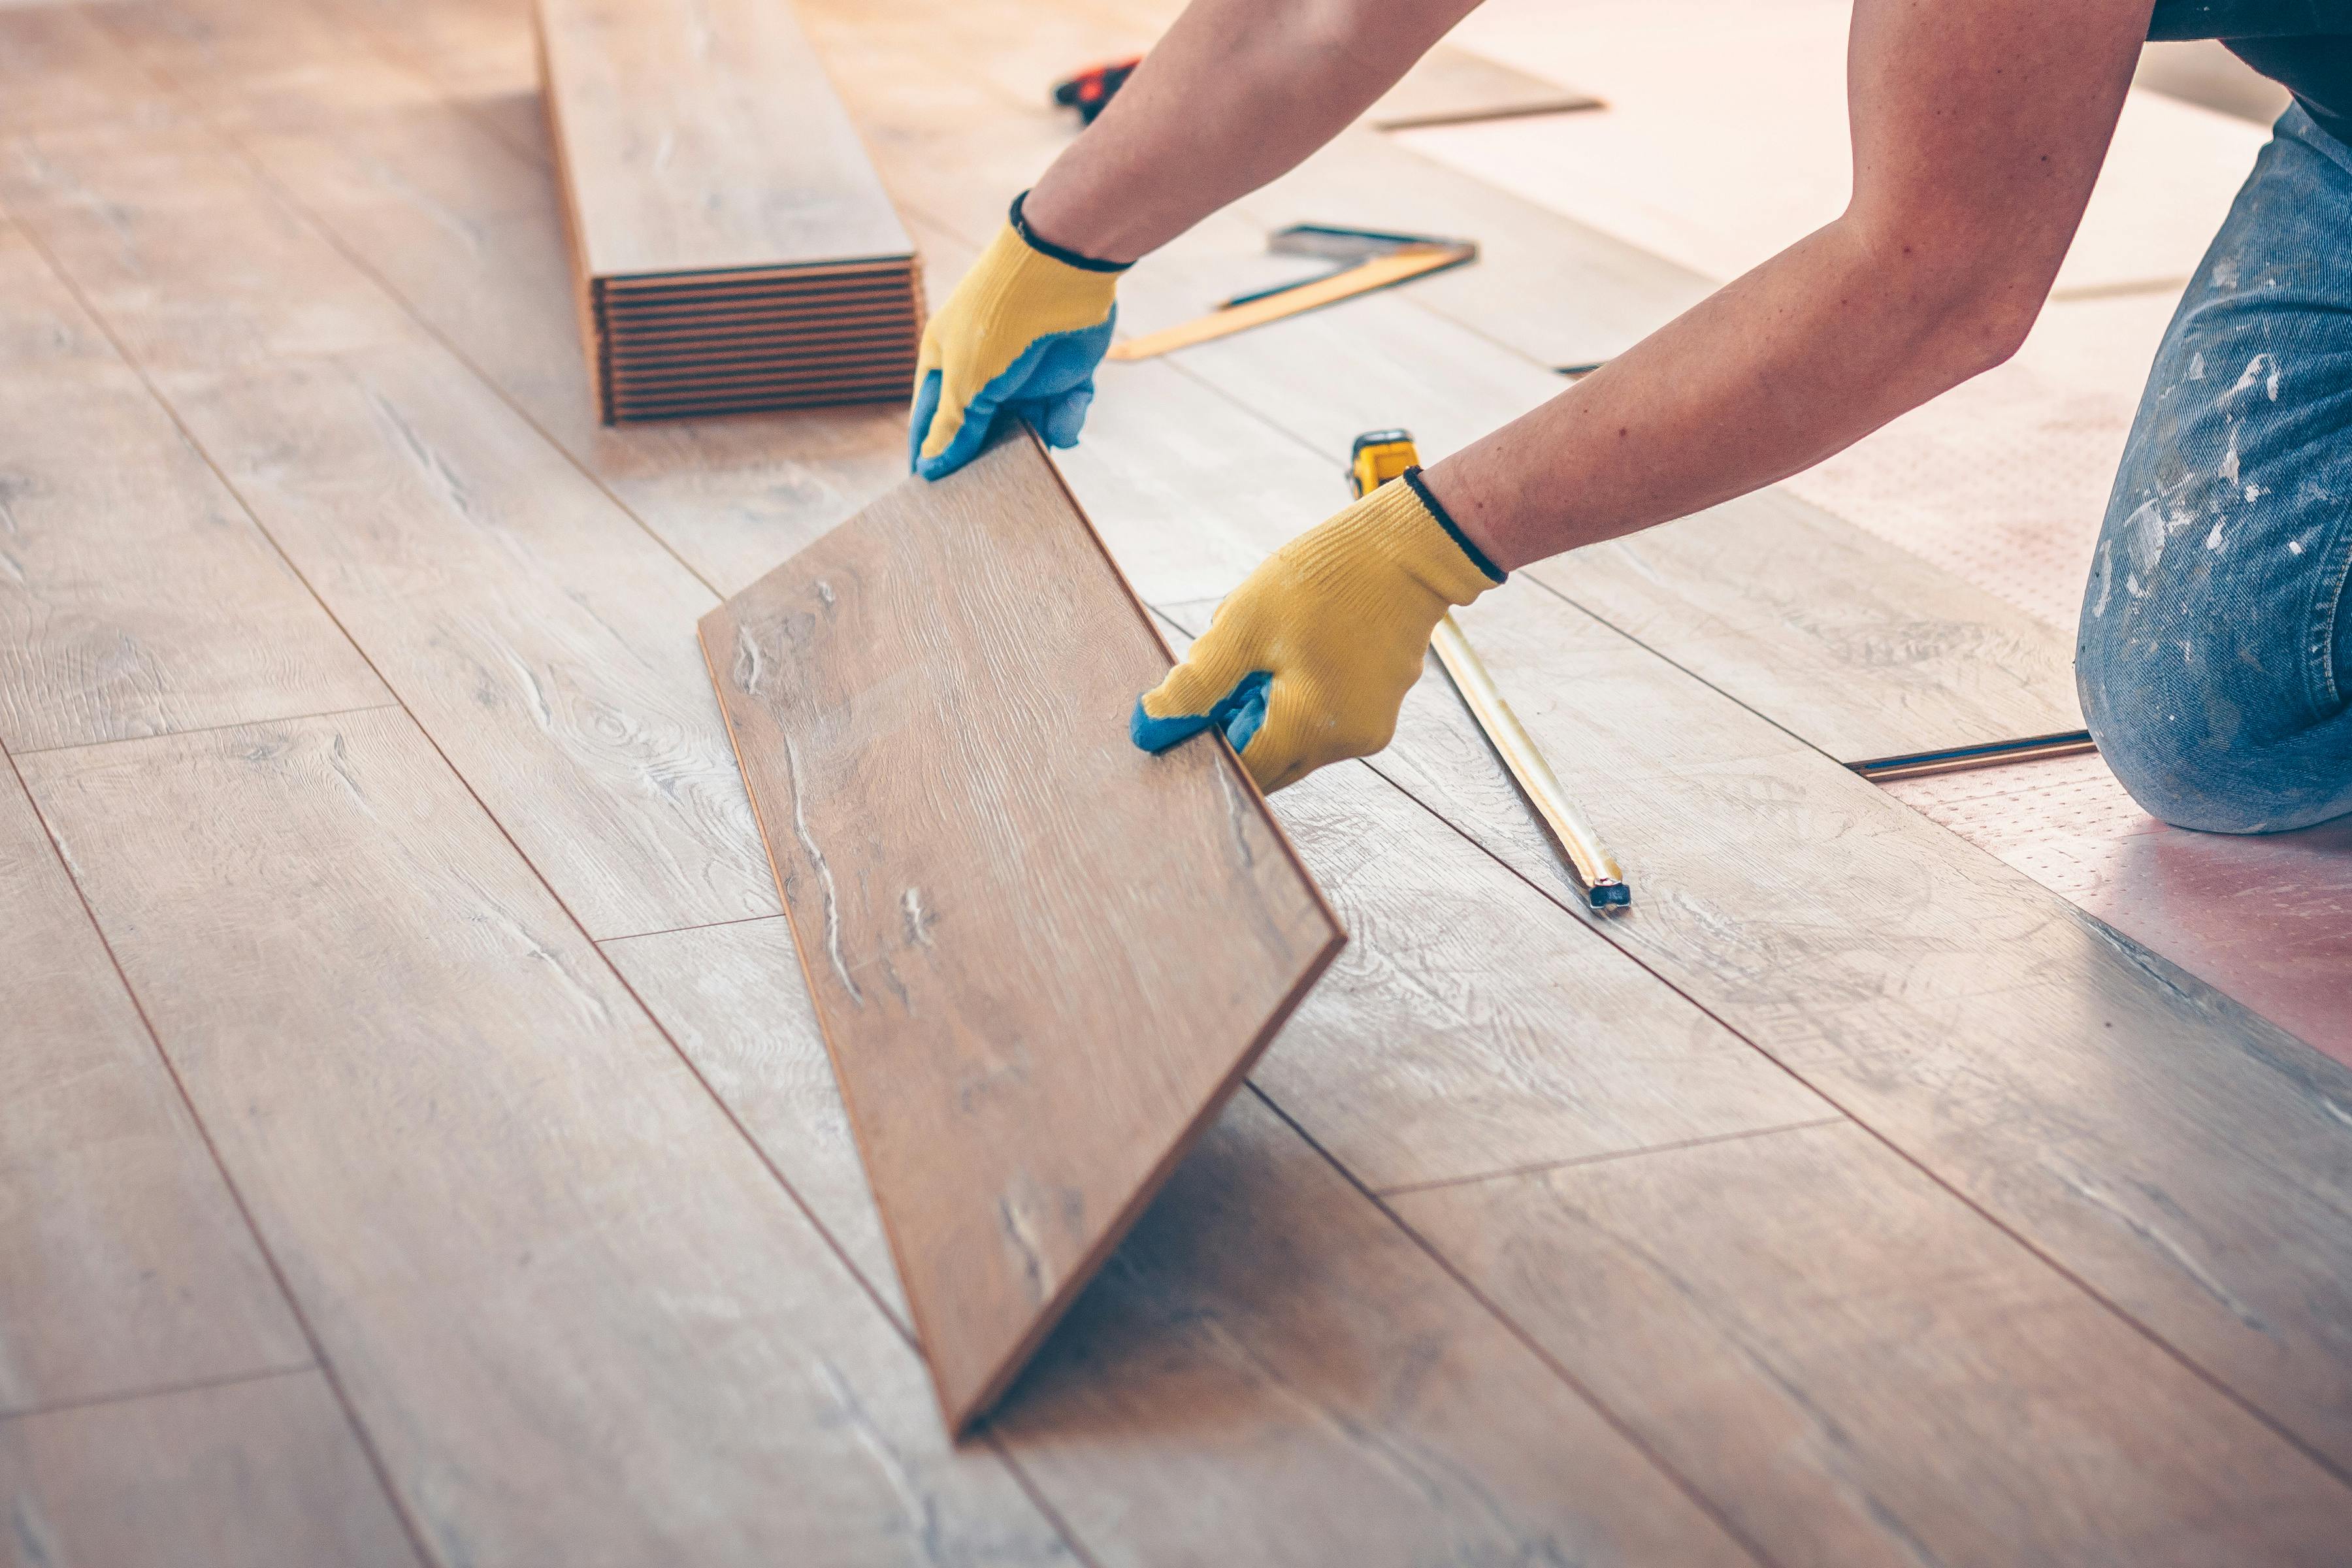 Stock image of someone laying a floor piece